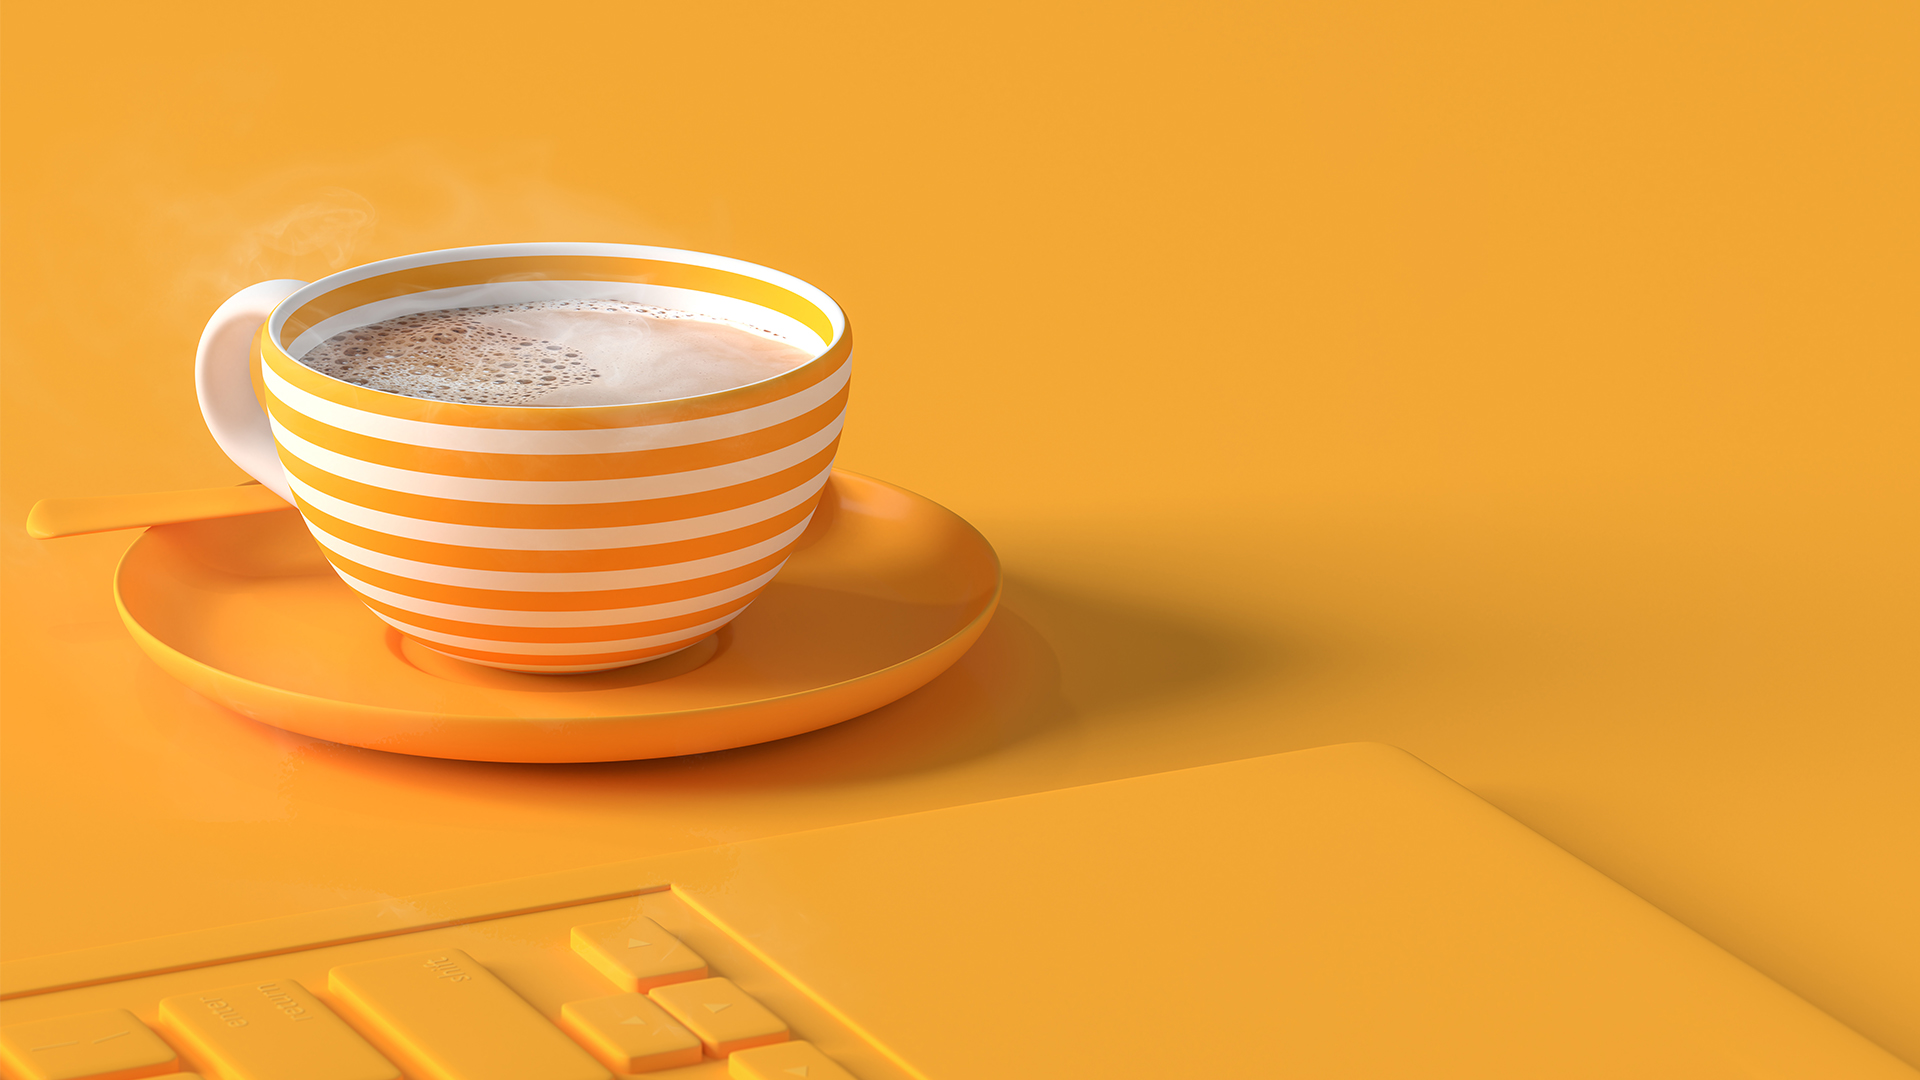 Yellow keyboard and white and yellow striped mug on saucer with steaming coffee